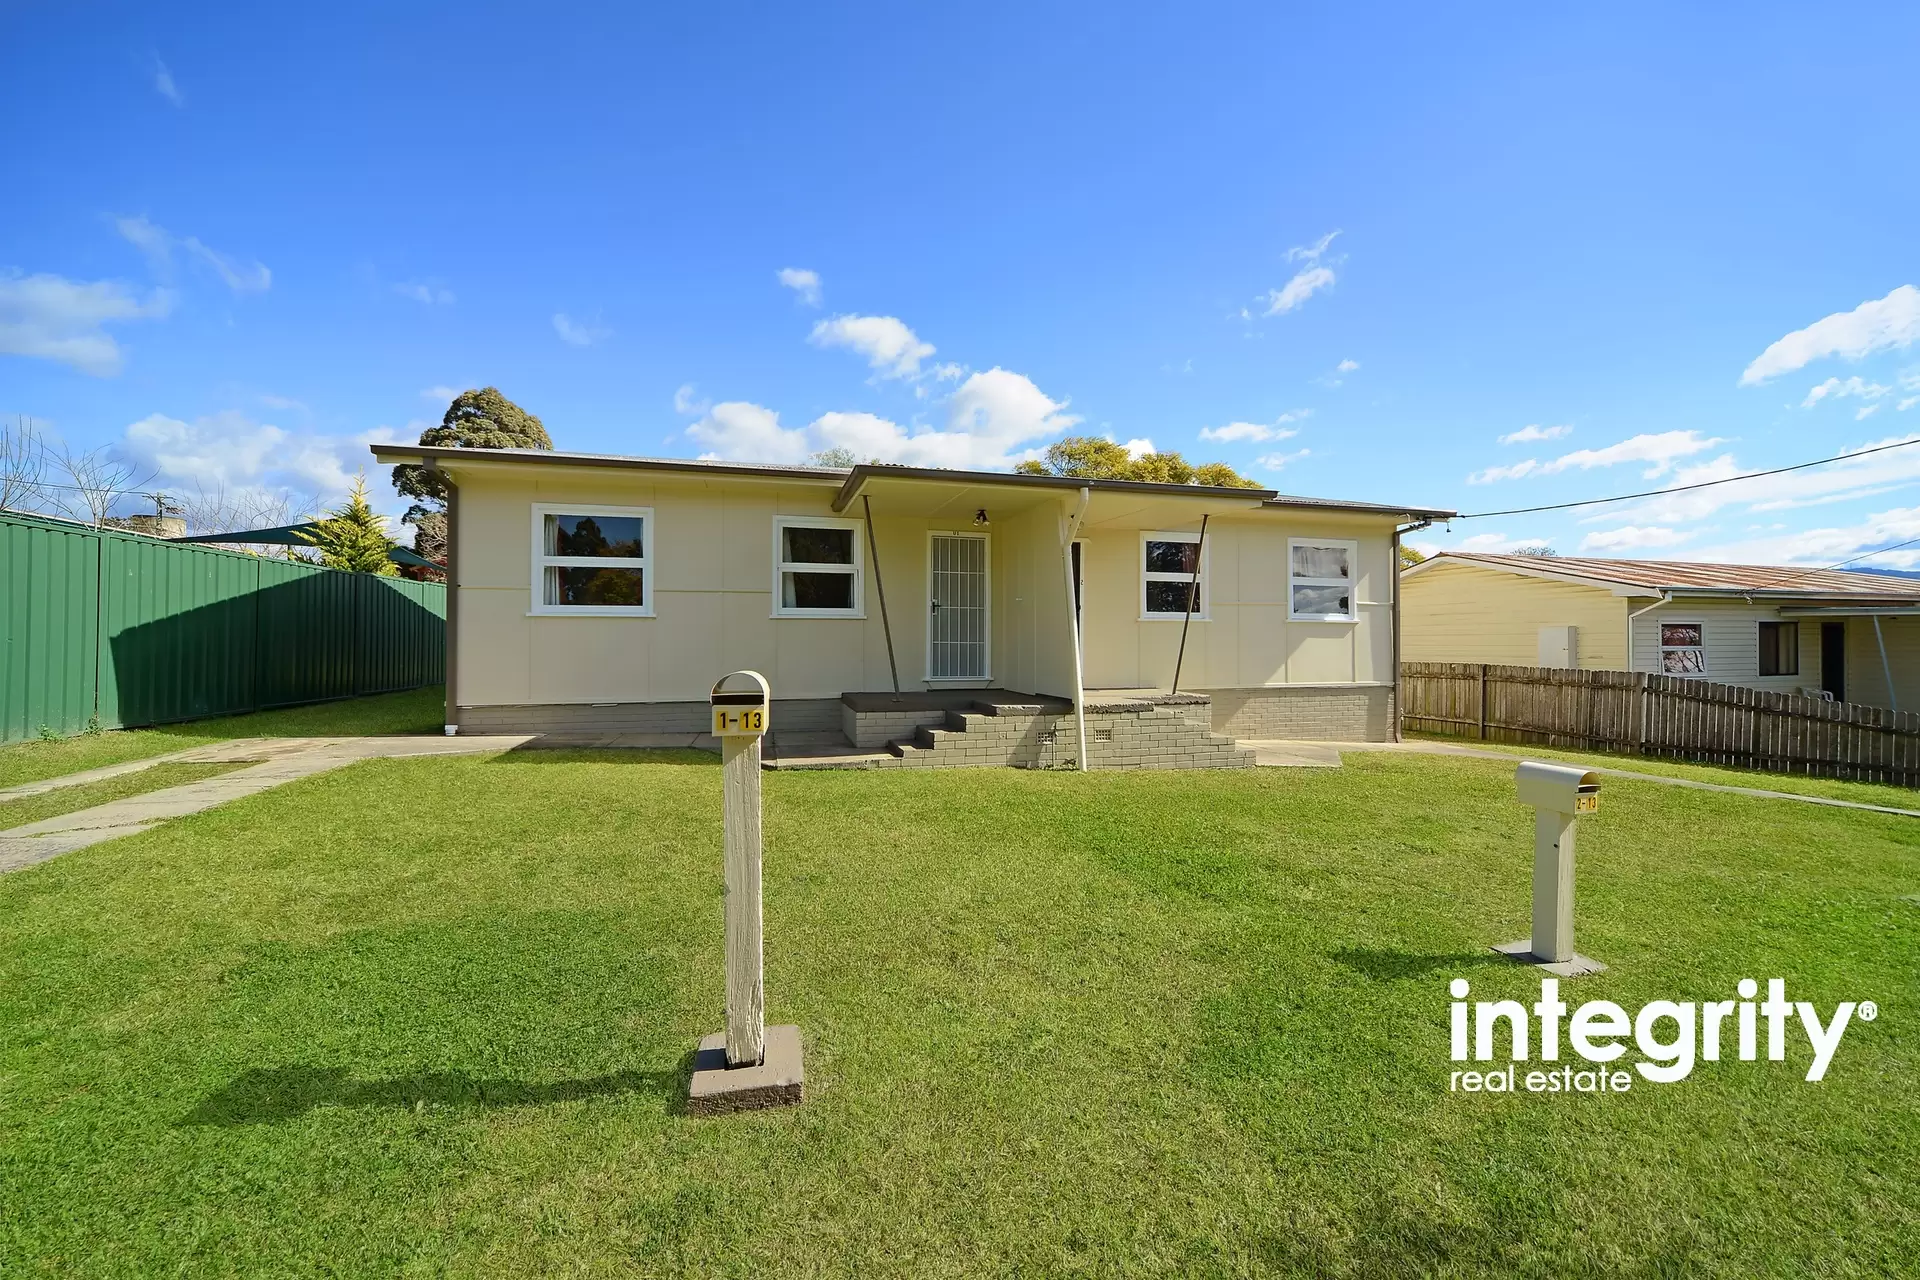 2/13 View Street, Nowra Leased by Integrity Real Estate - image 1